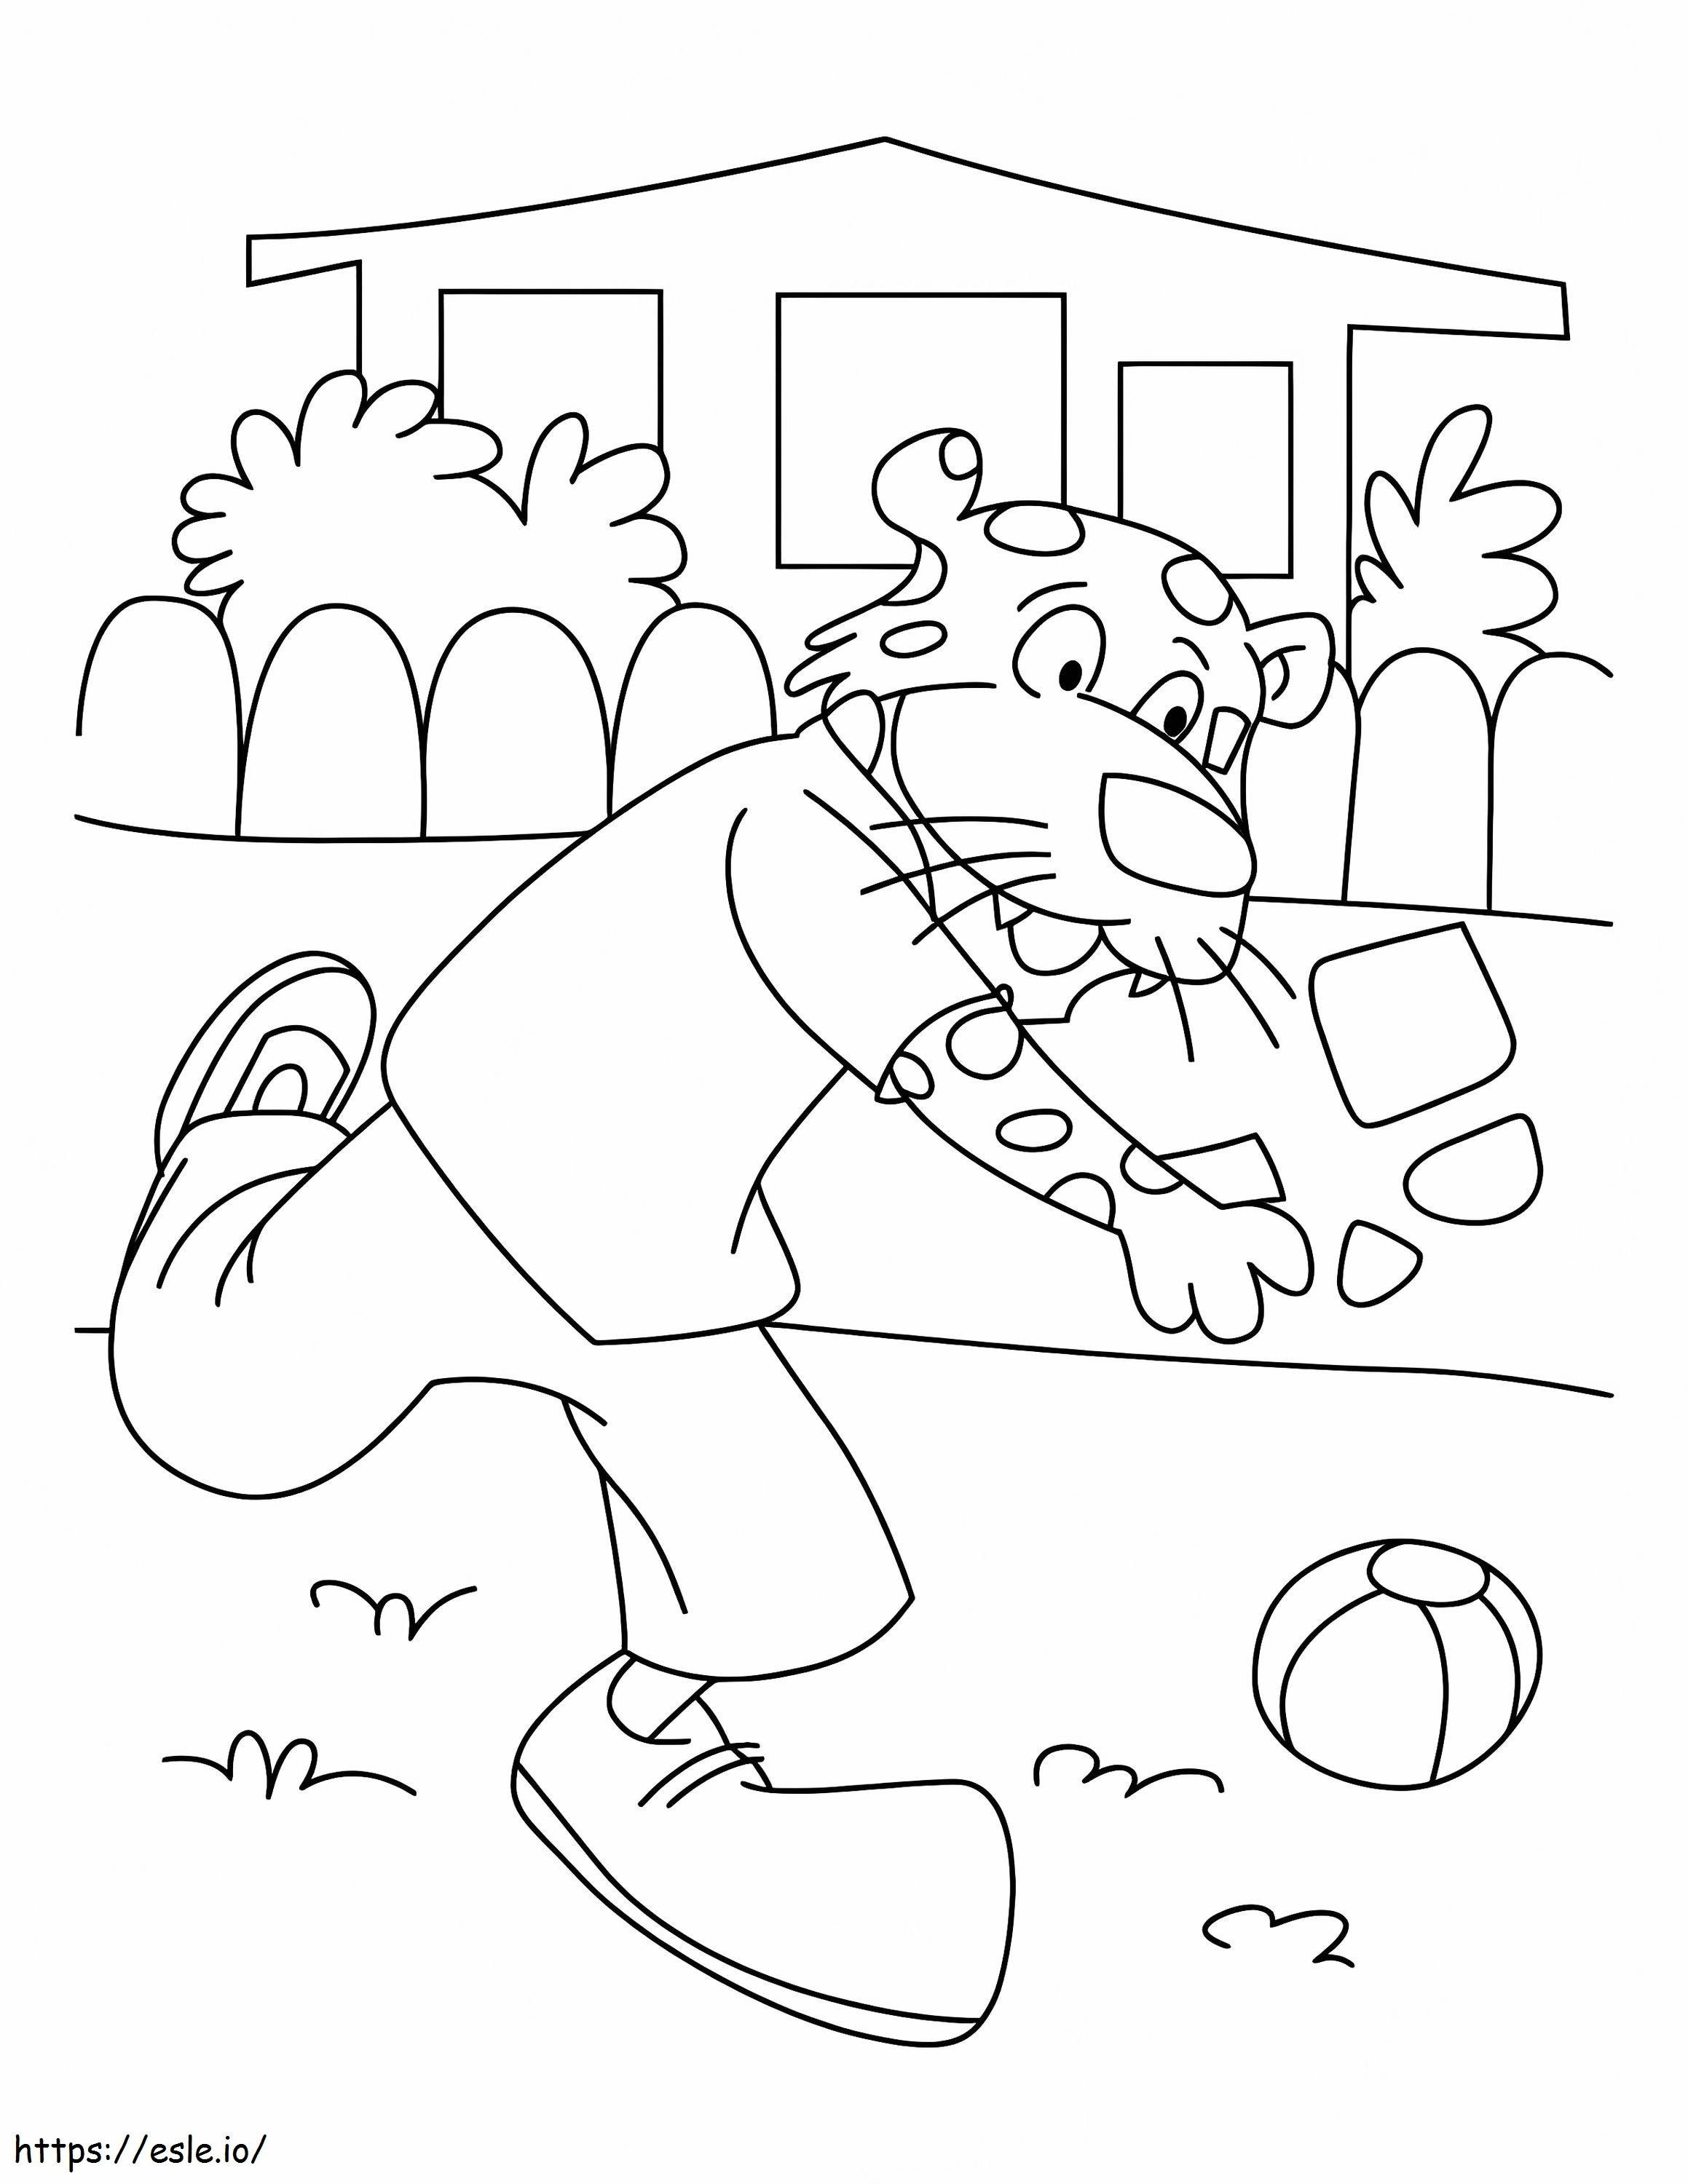 Leopard Playing With Ball coloring page